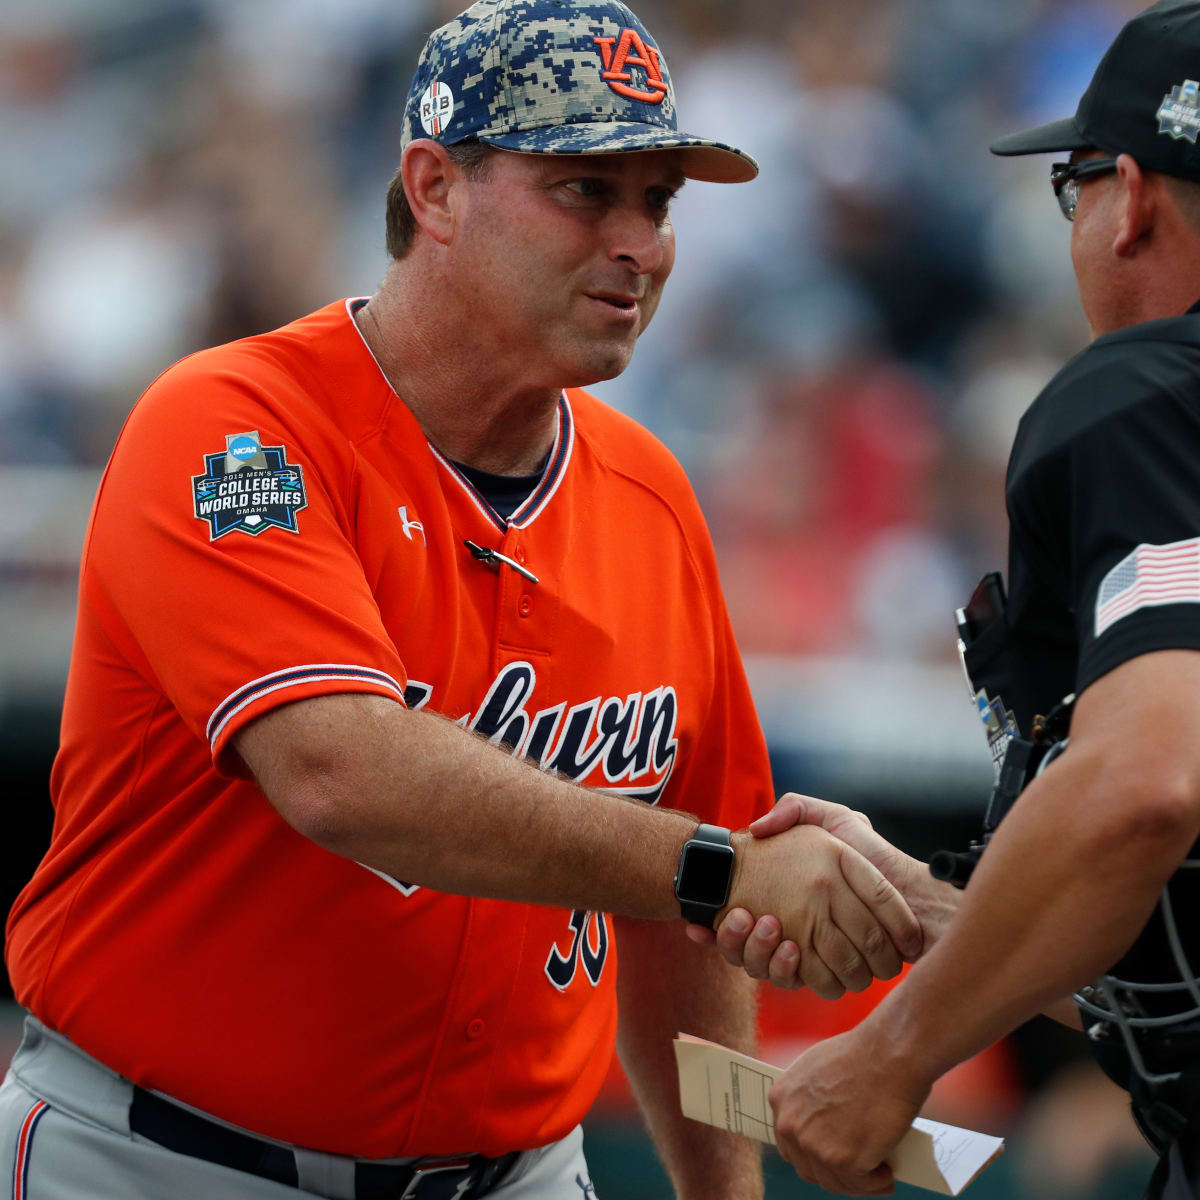 Auburn baseball faces it's first significant test of the 2022